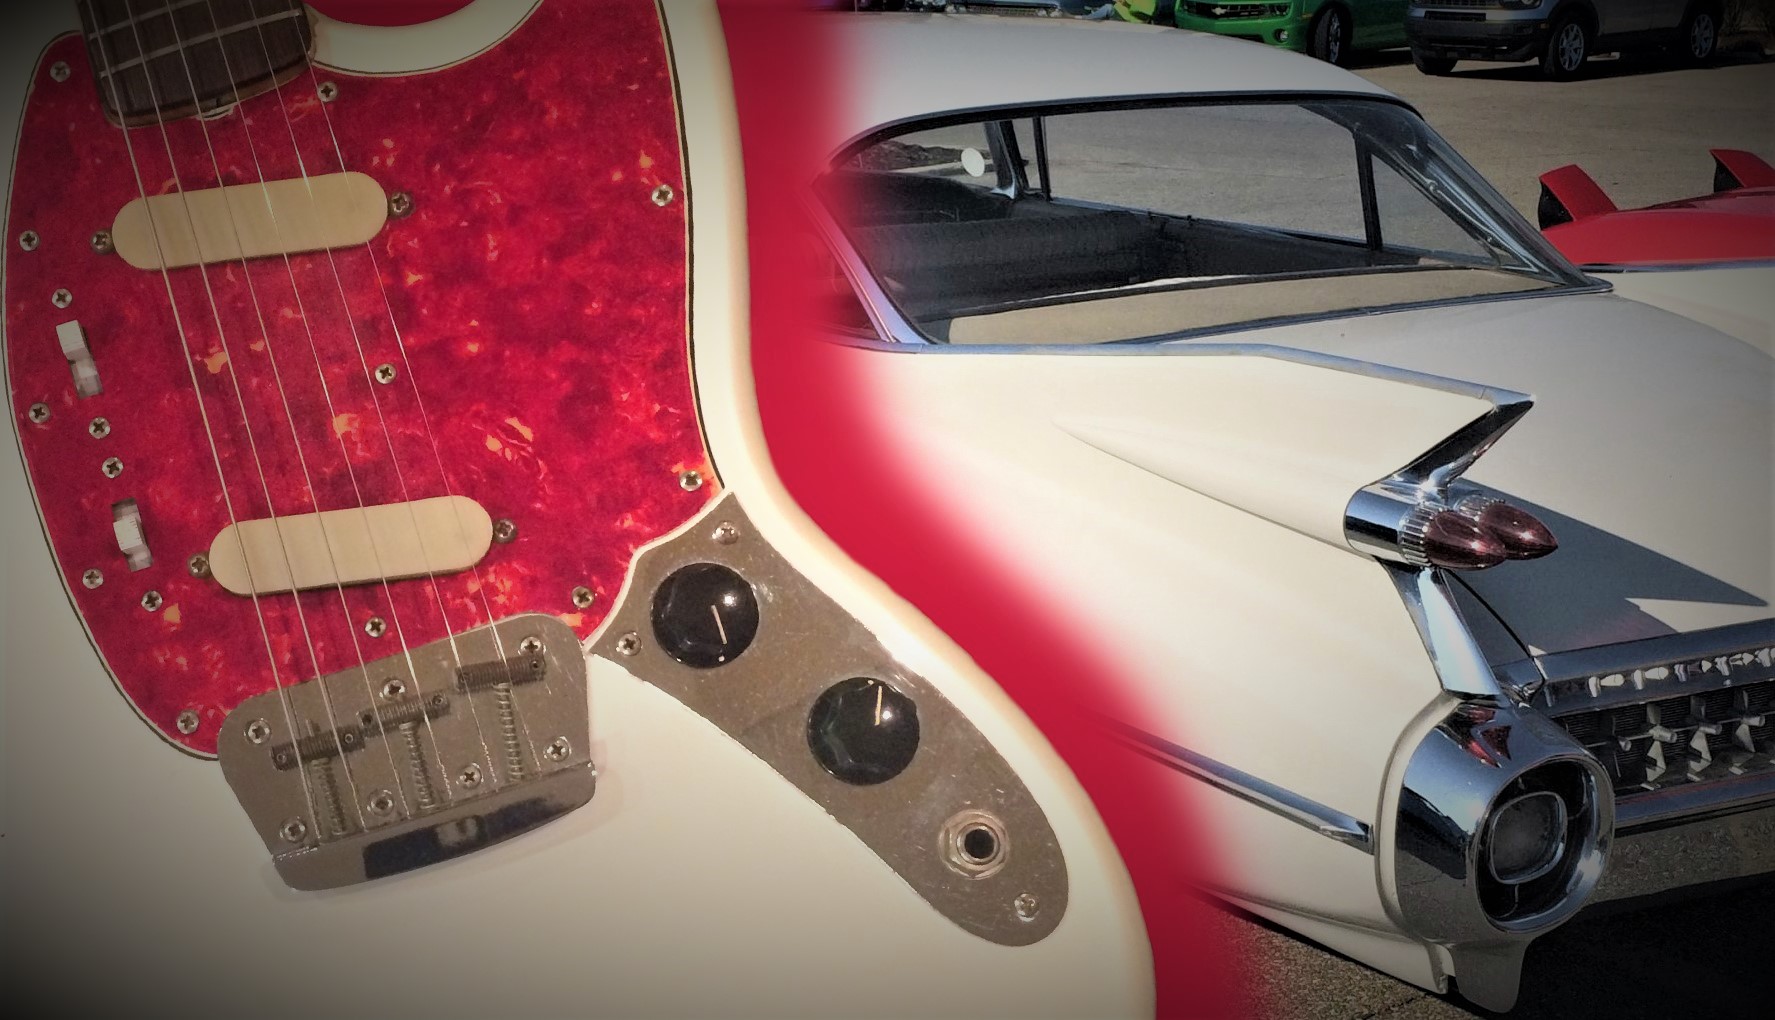 Fender Guitars: How the Automotive Industry Helped Influence a